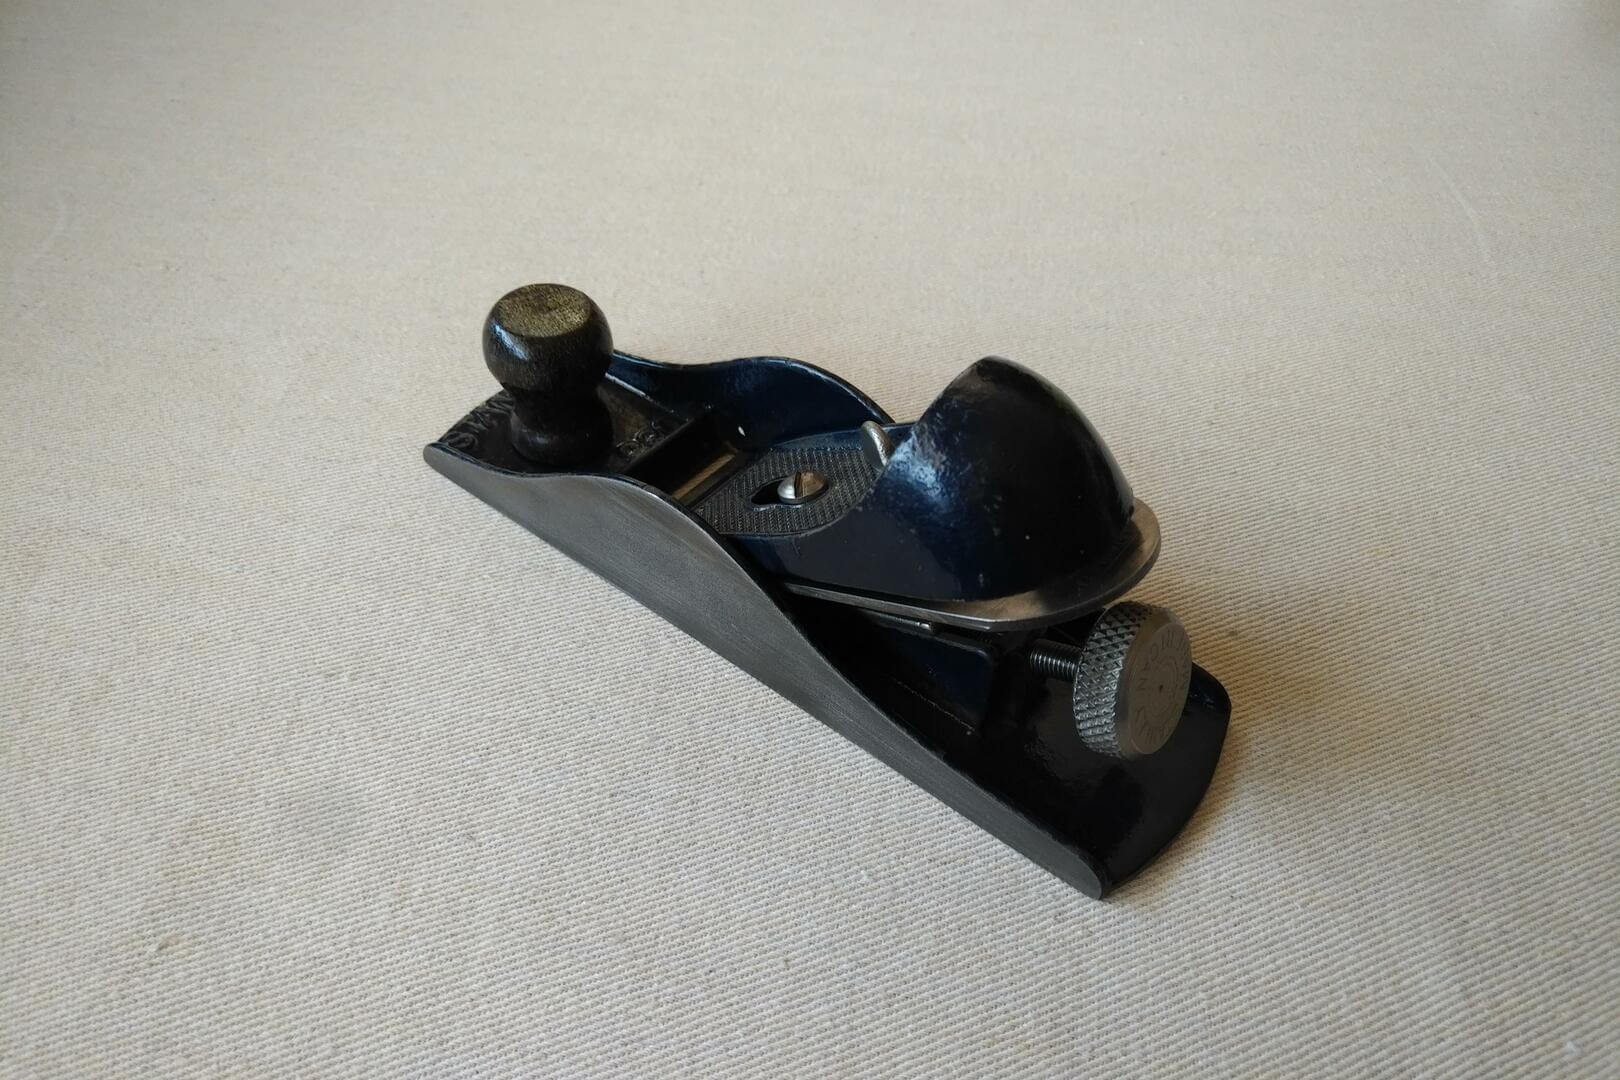 Vintage Stanley No. 220 adjustable block wood plane blue colour & rosewood knob. Antique made in Canada collectible carpentry cabinet maker edge hand tools